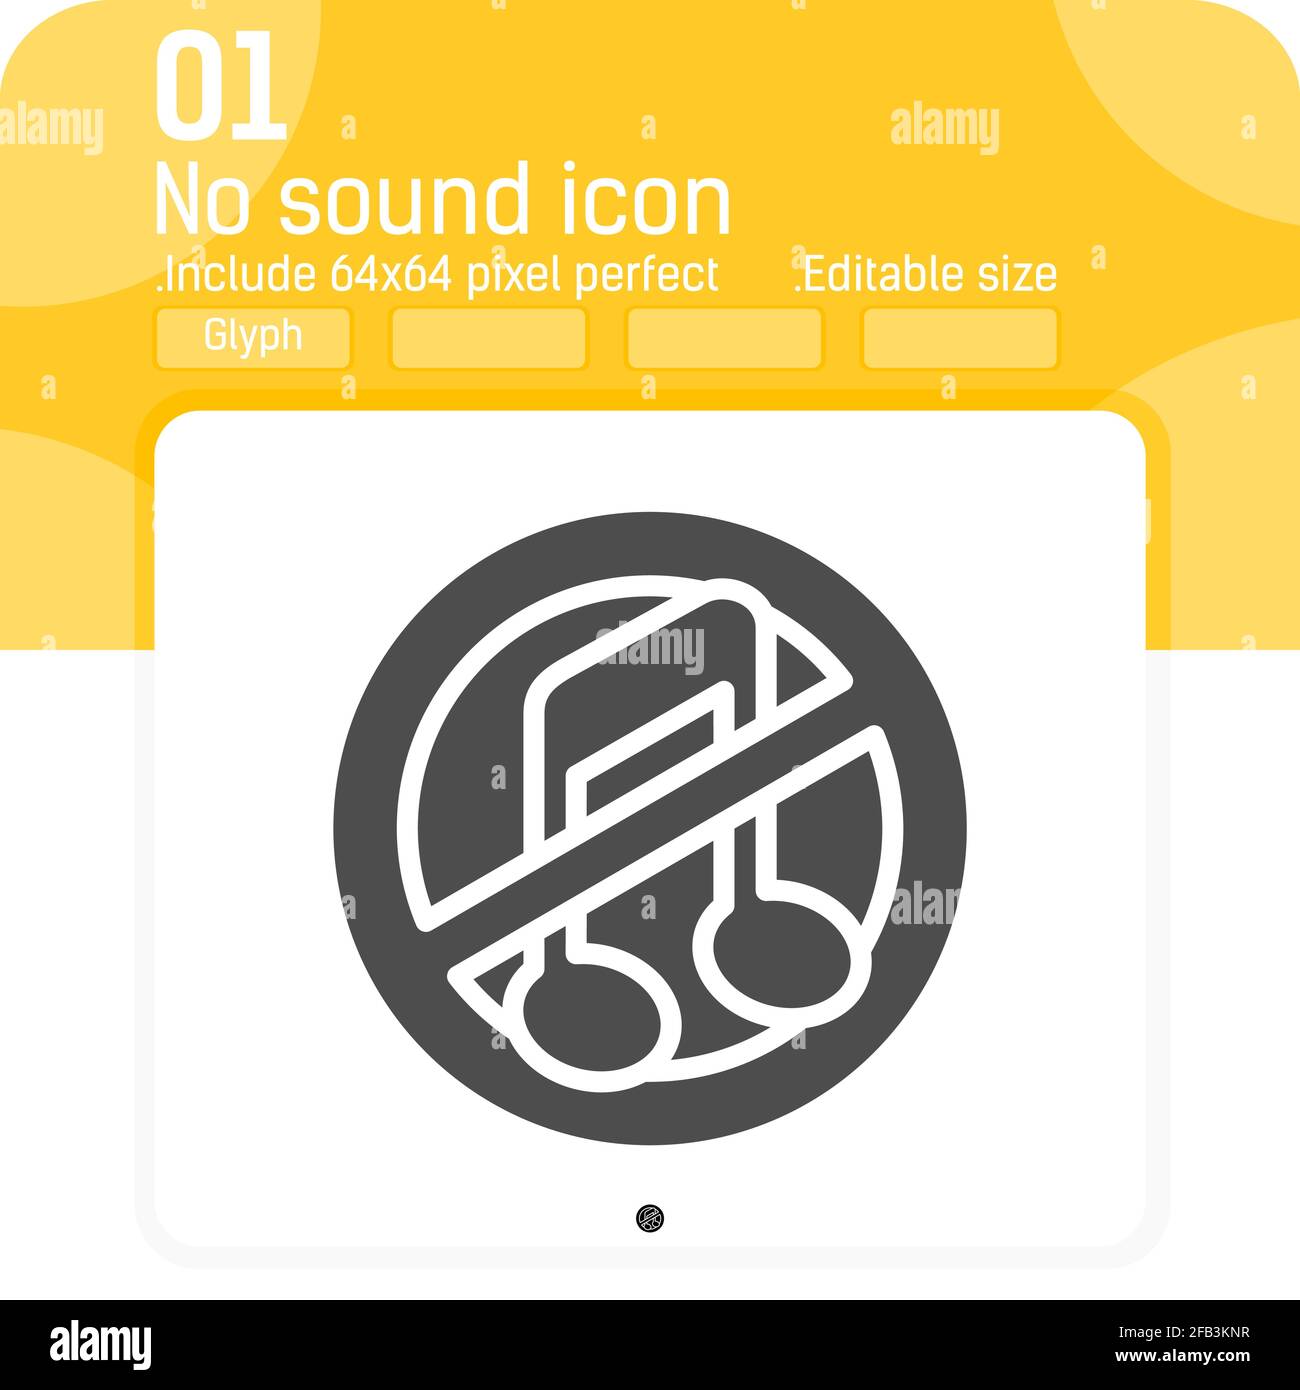 No sound icon with glyph style isolated on white background. Vector illustration flat style element thin sign symbol icon for ui, ux, web design, logo Stock Vector